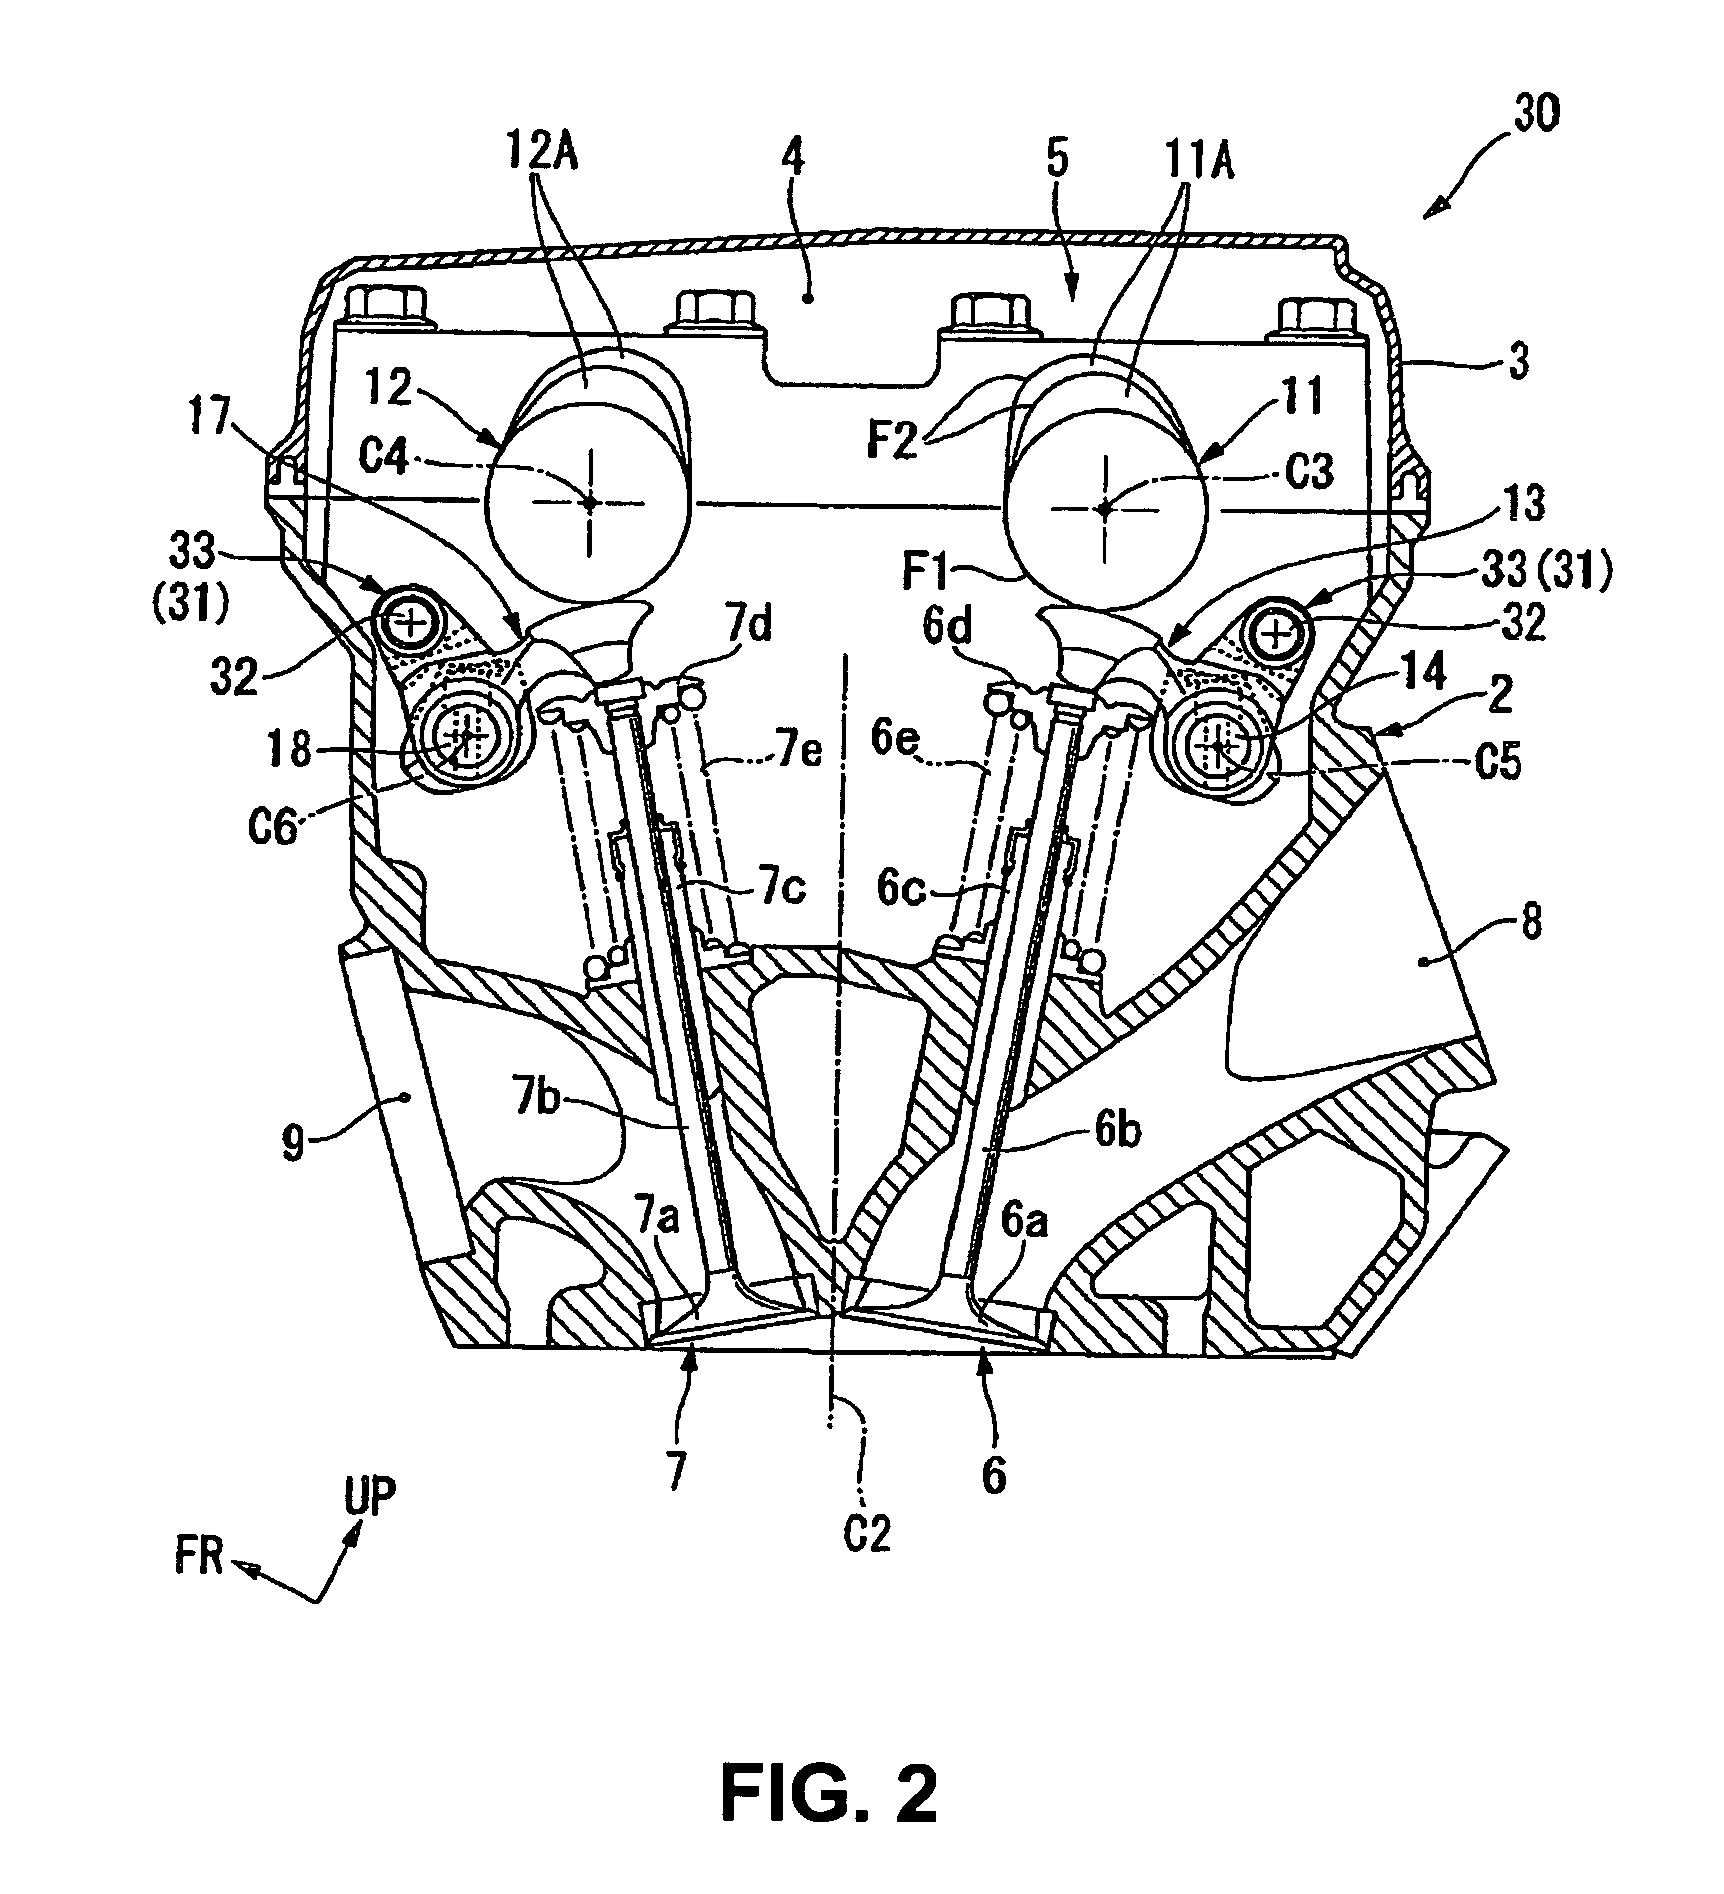 Internal combustion engine having a hydraulically-actuated variable valve control system, and motorcycle incorporating same